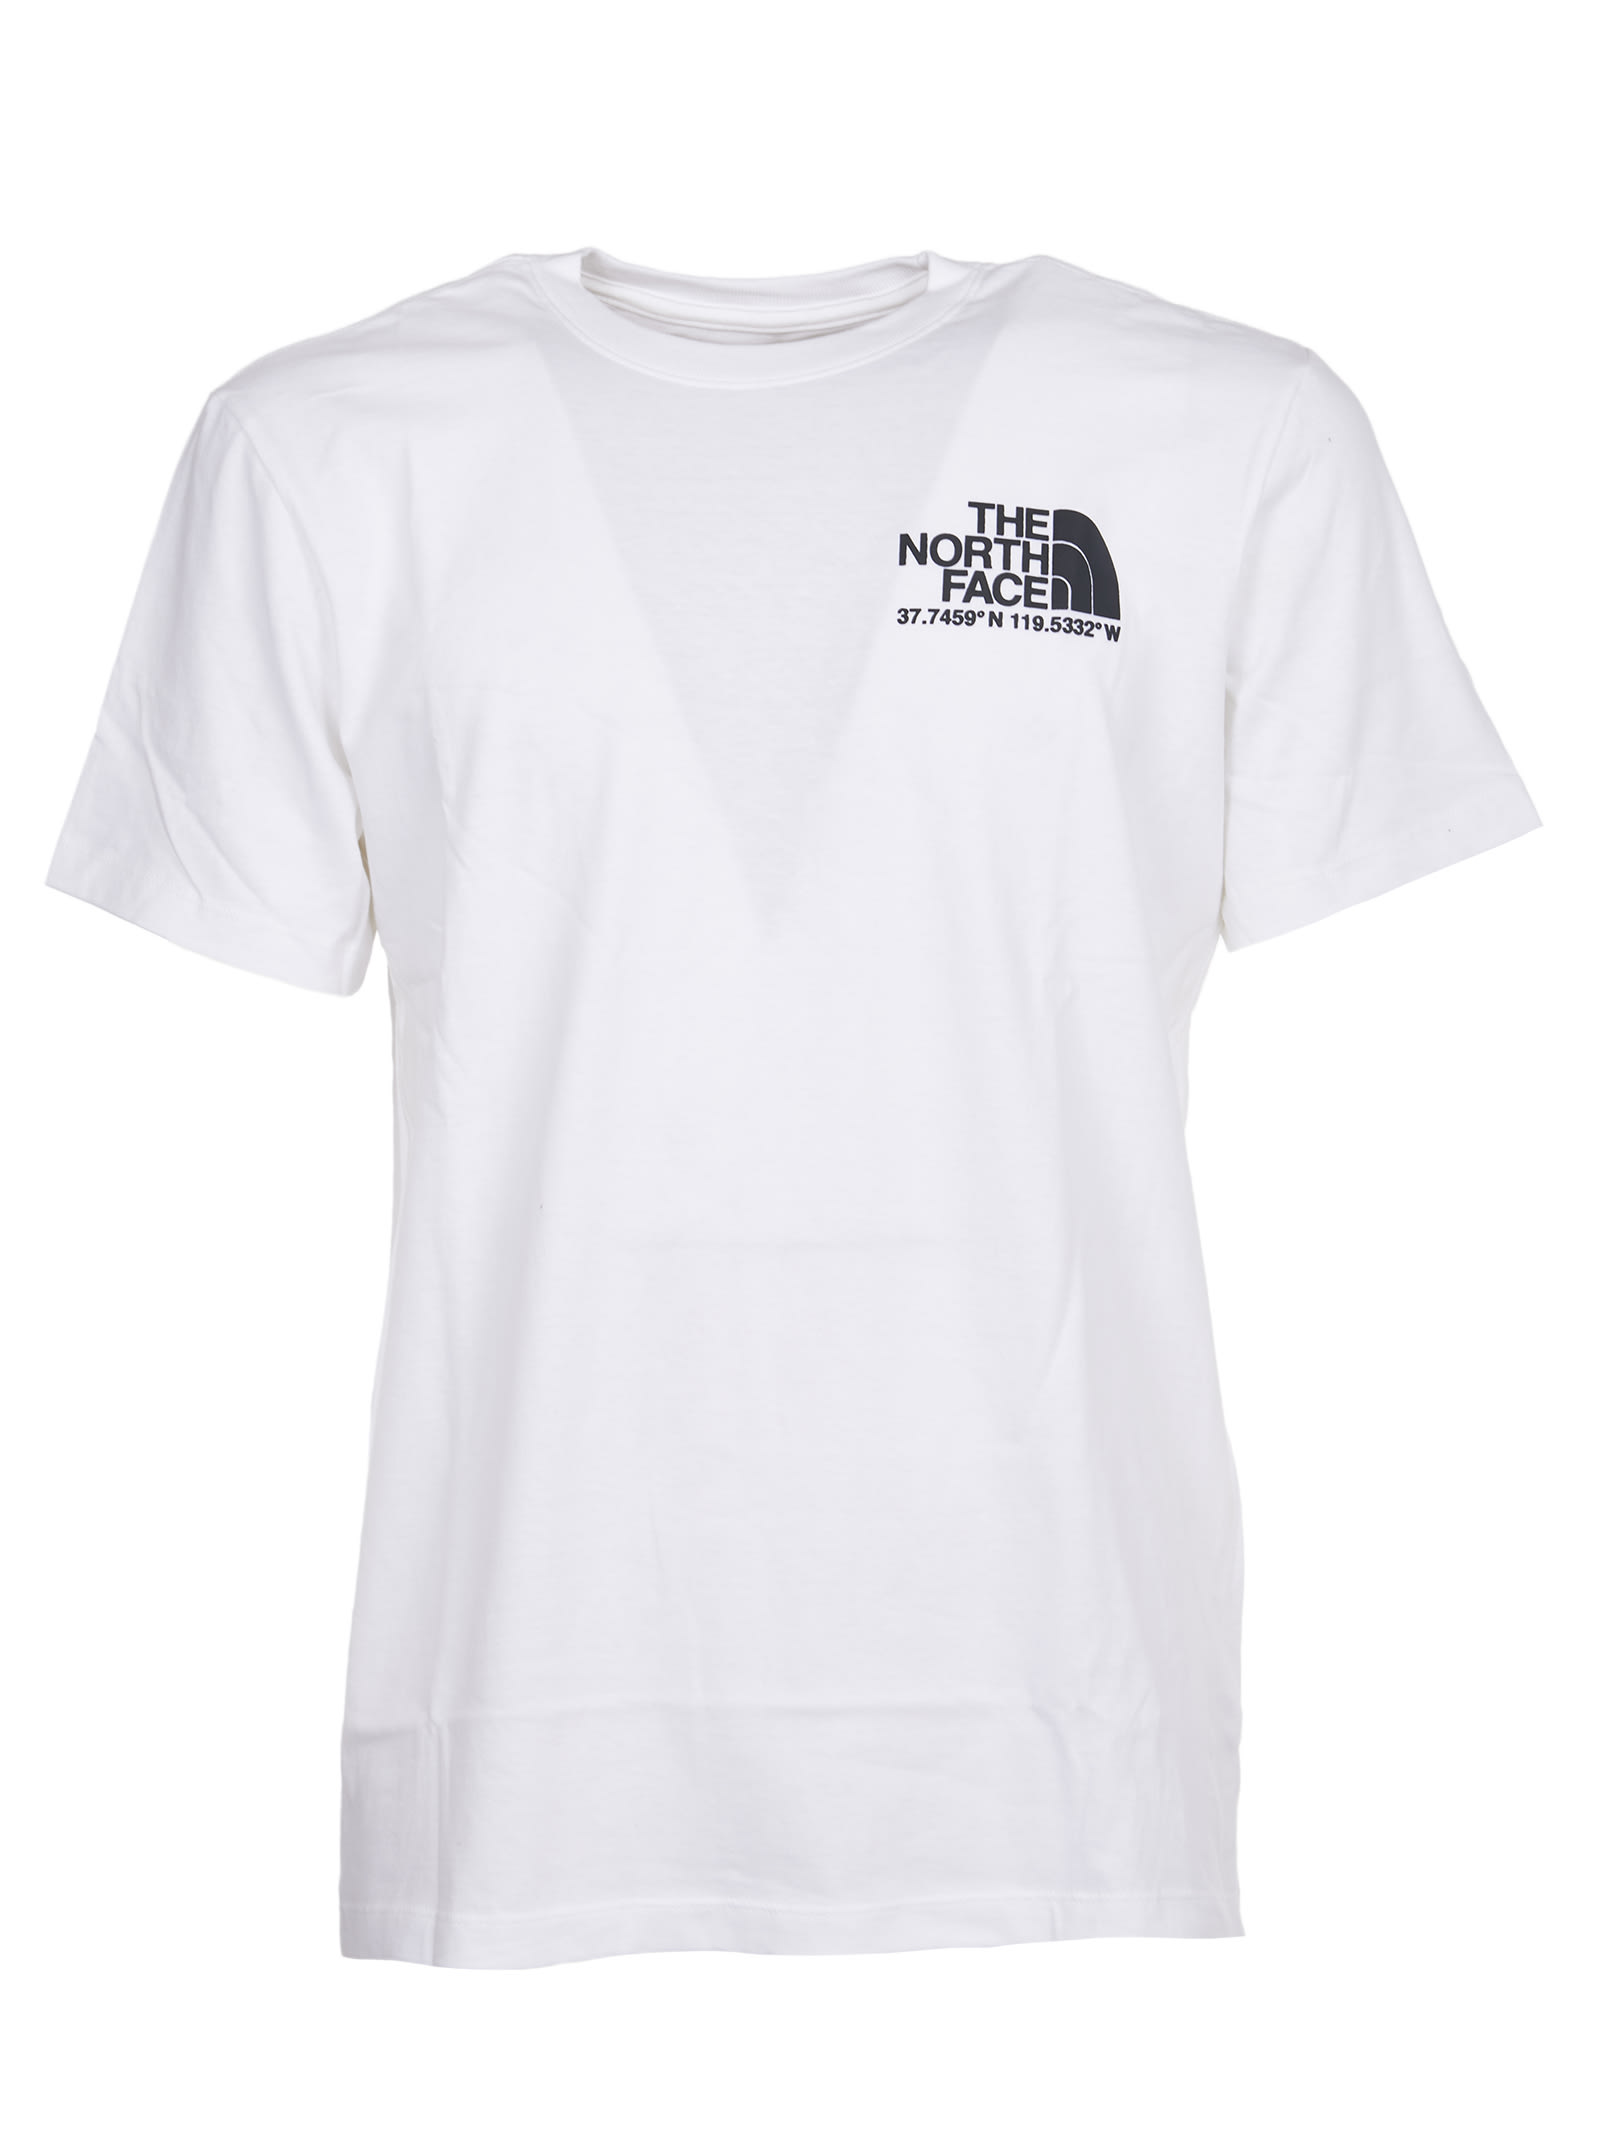 The North Face White Coordinates Print T-shirt